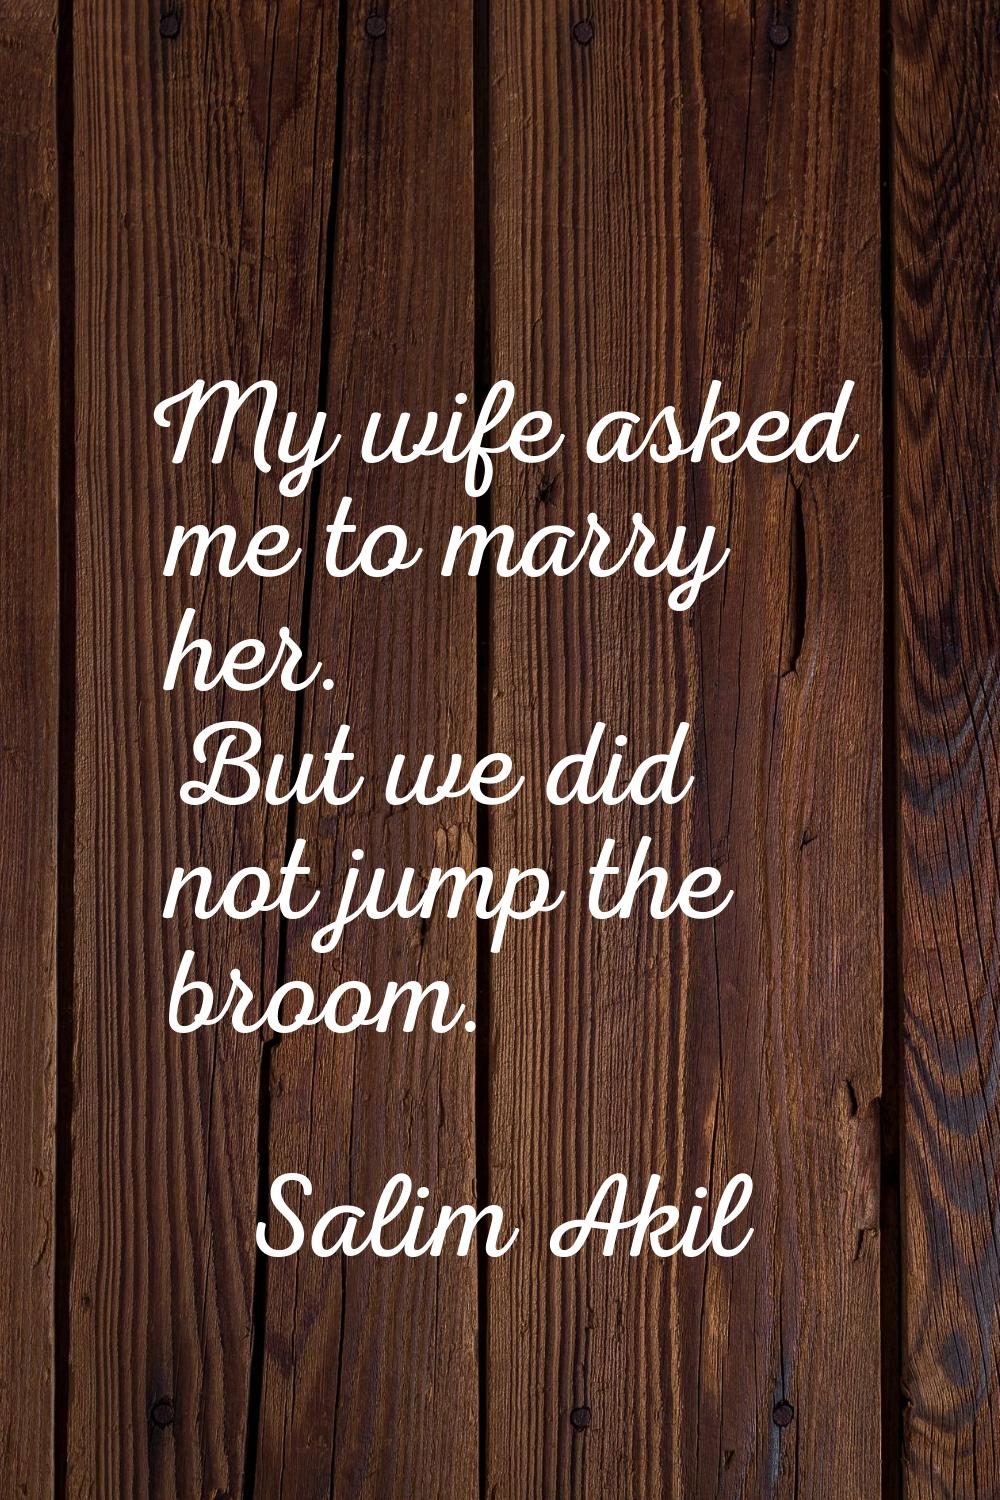 My wife asked me to marry her. But we did not jump the broom.